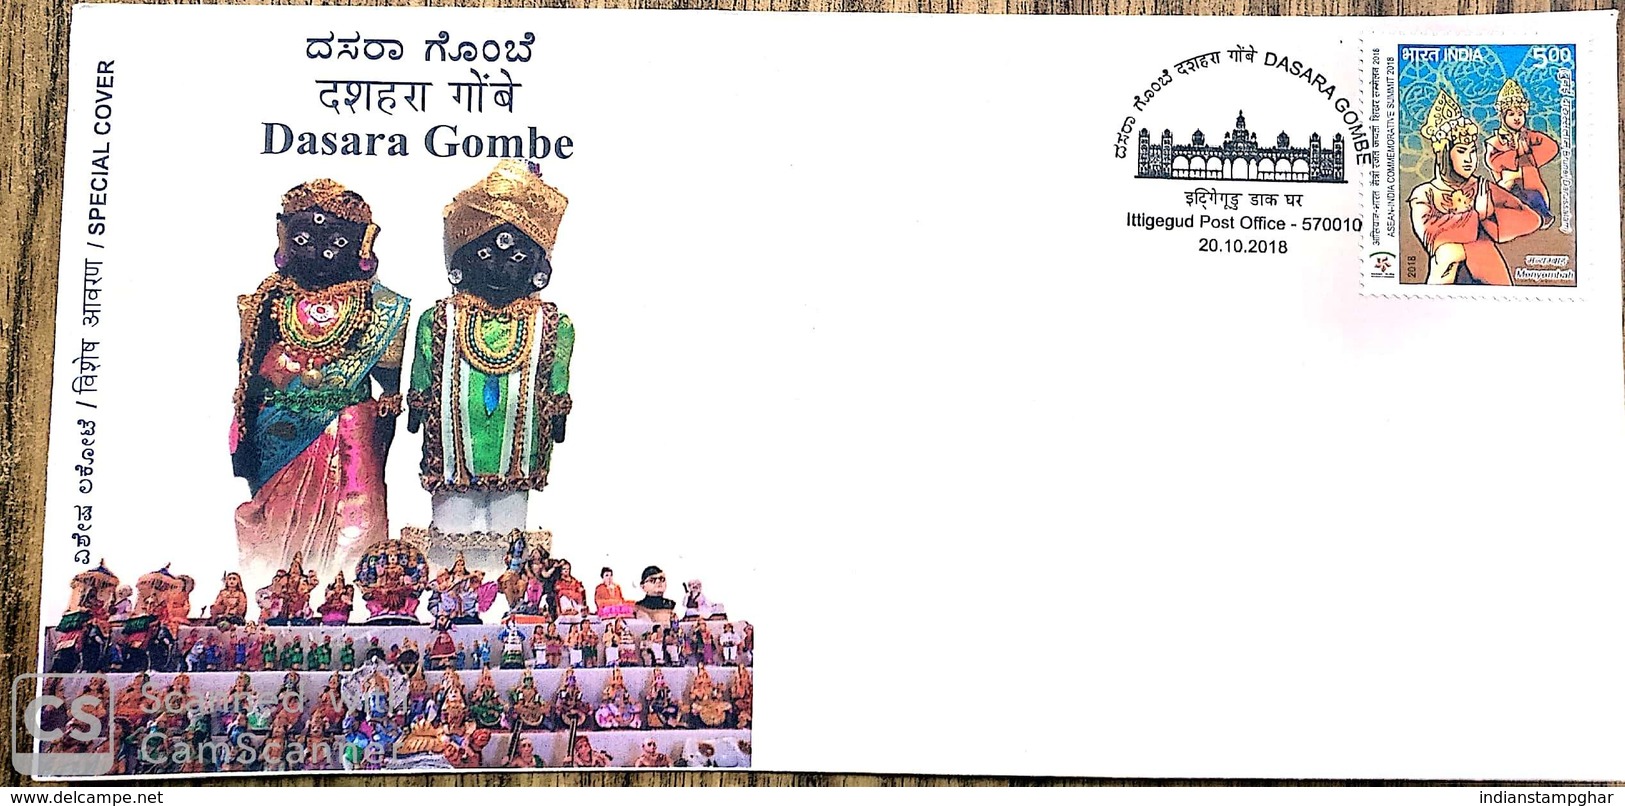 Dasara Gombe ,Puppet Doll ,Traditional Festival Culture, King & Queen Pattada Gombe, India Special Cover - Marionnettes